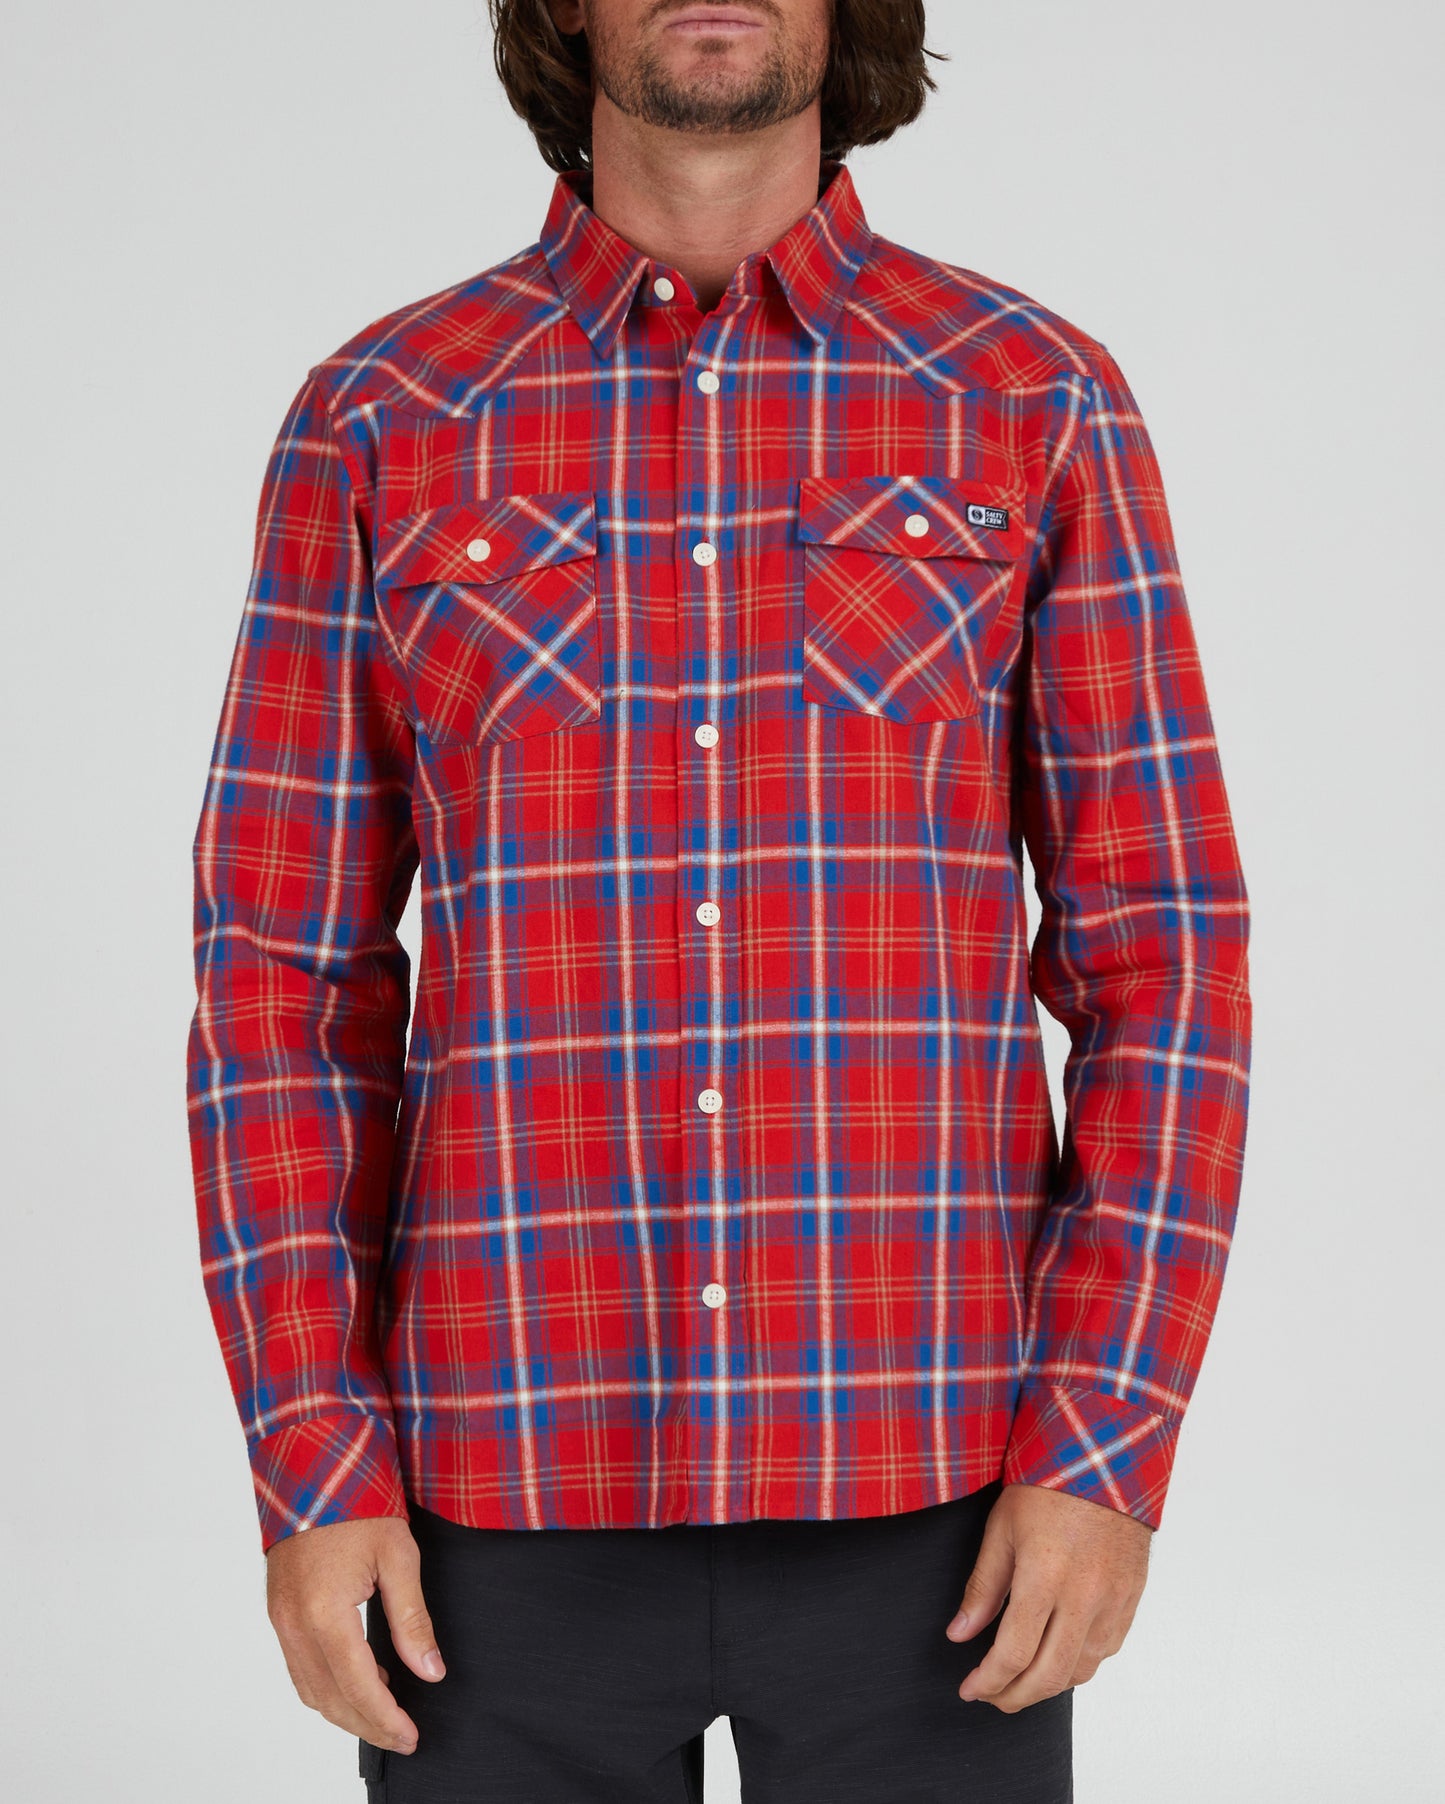 On body front of the Herdsman Red Flannel